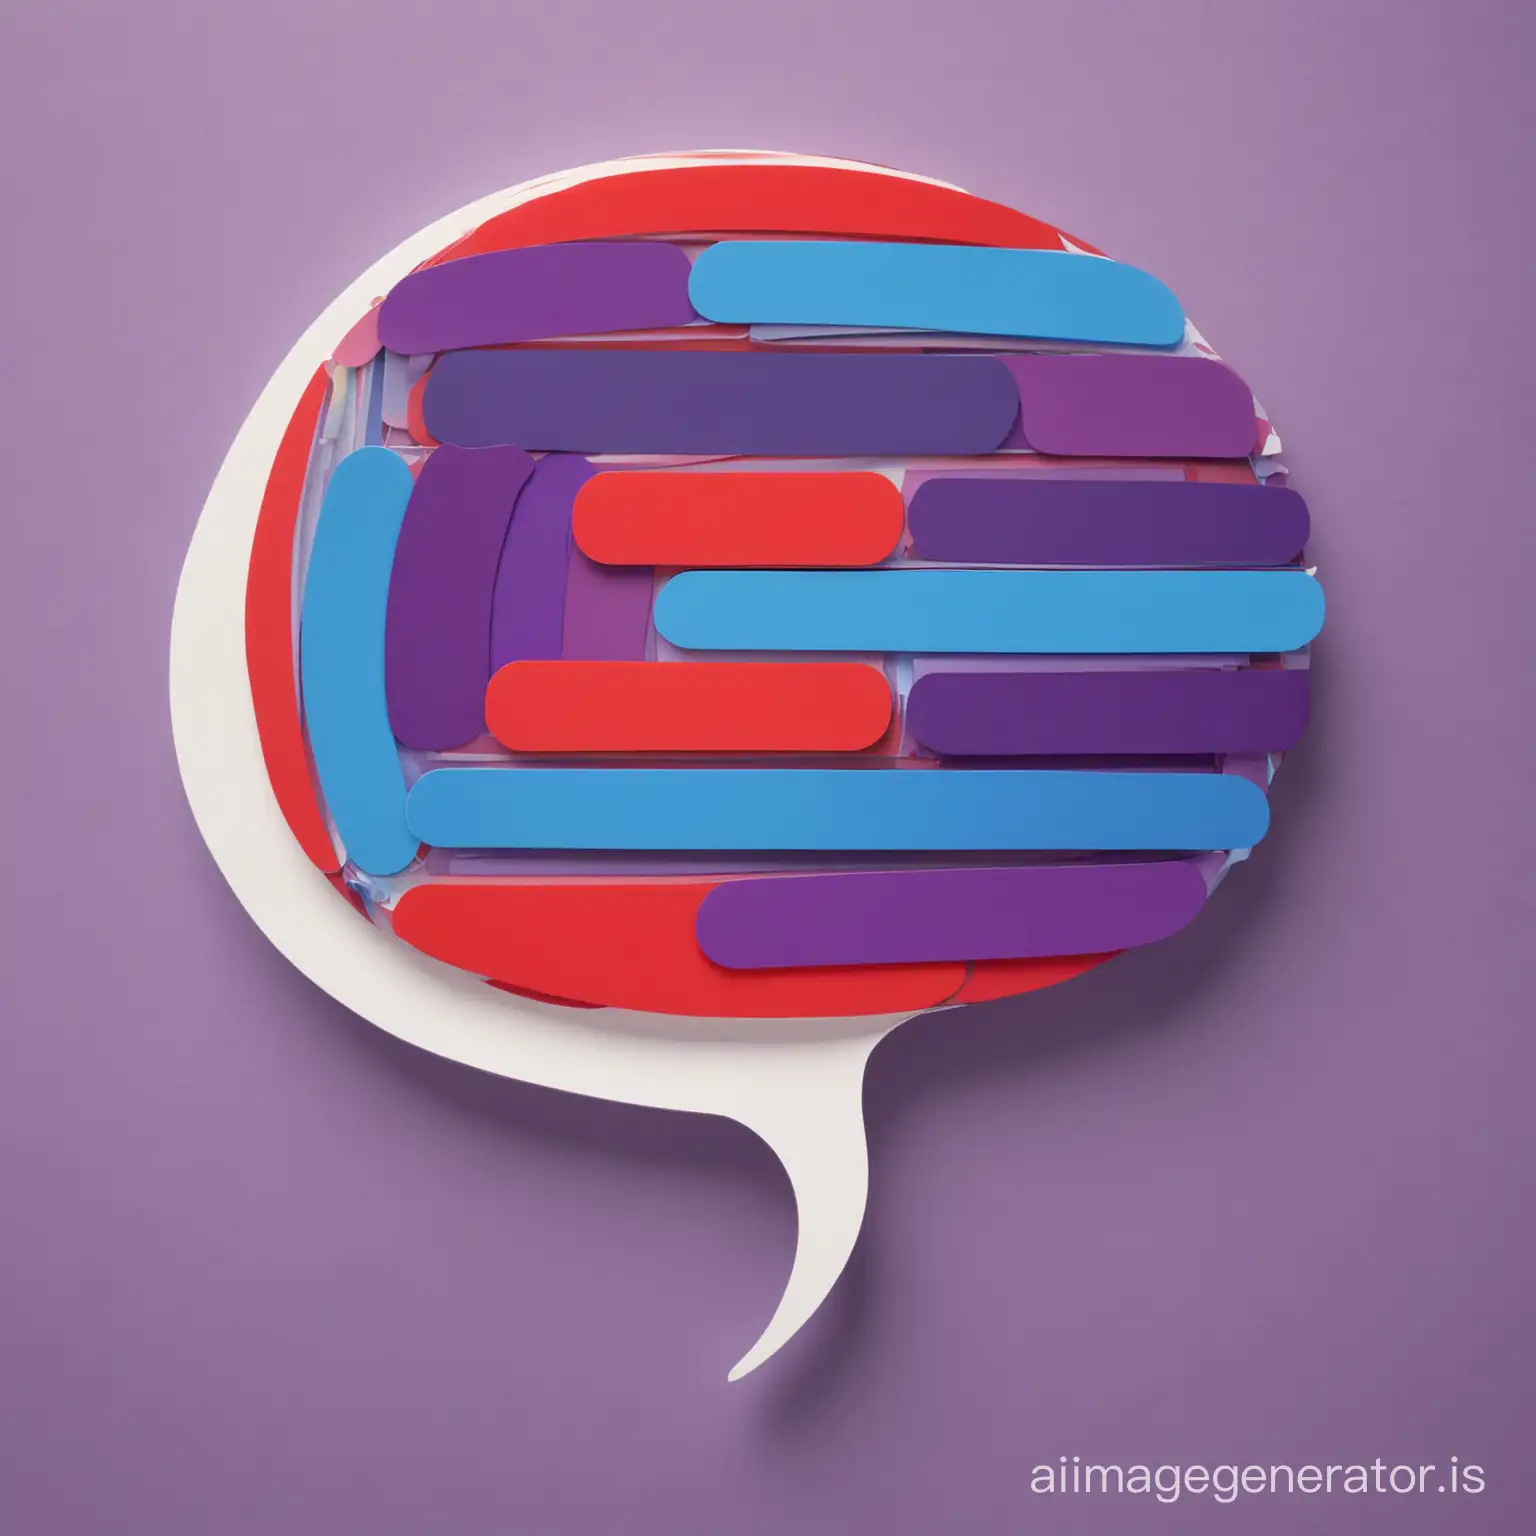 OBLONG SPEECH BUBBLE
FILLED WITH RED, BLUE, PURPLE,
COLOUR STRIPS